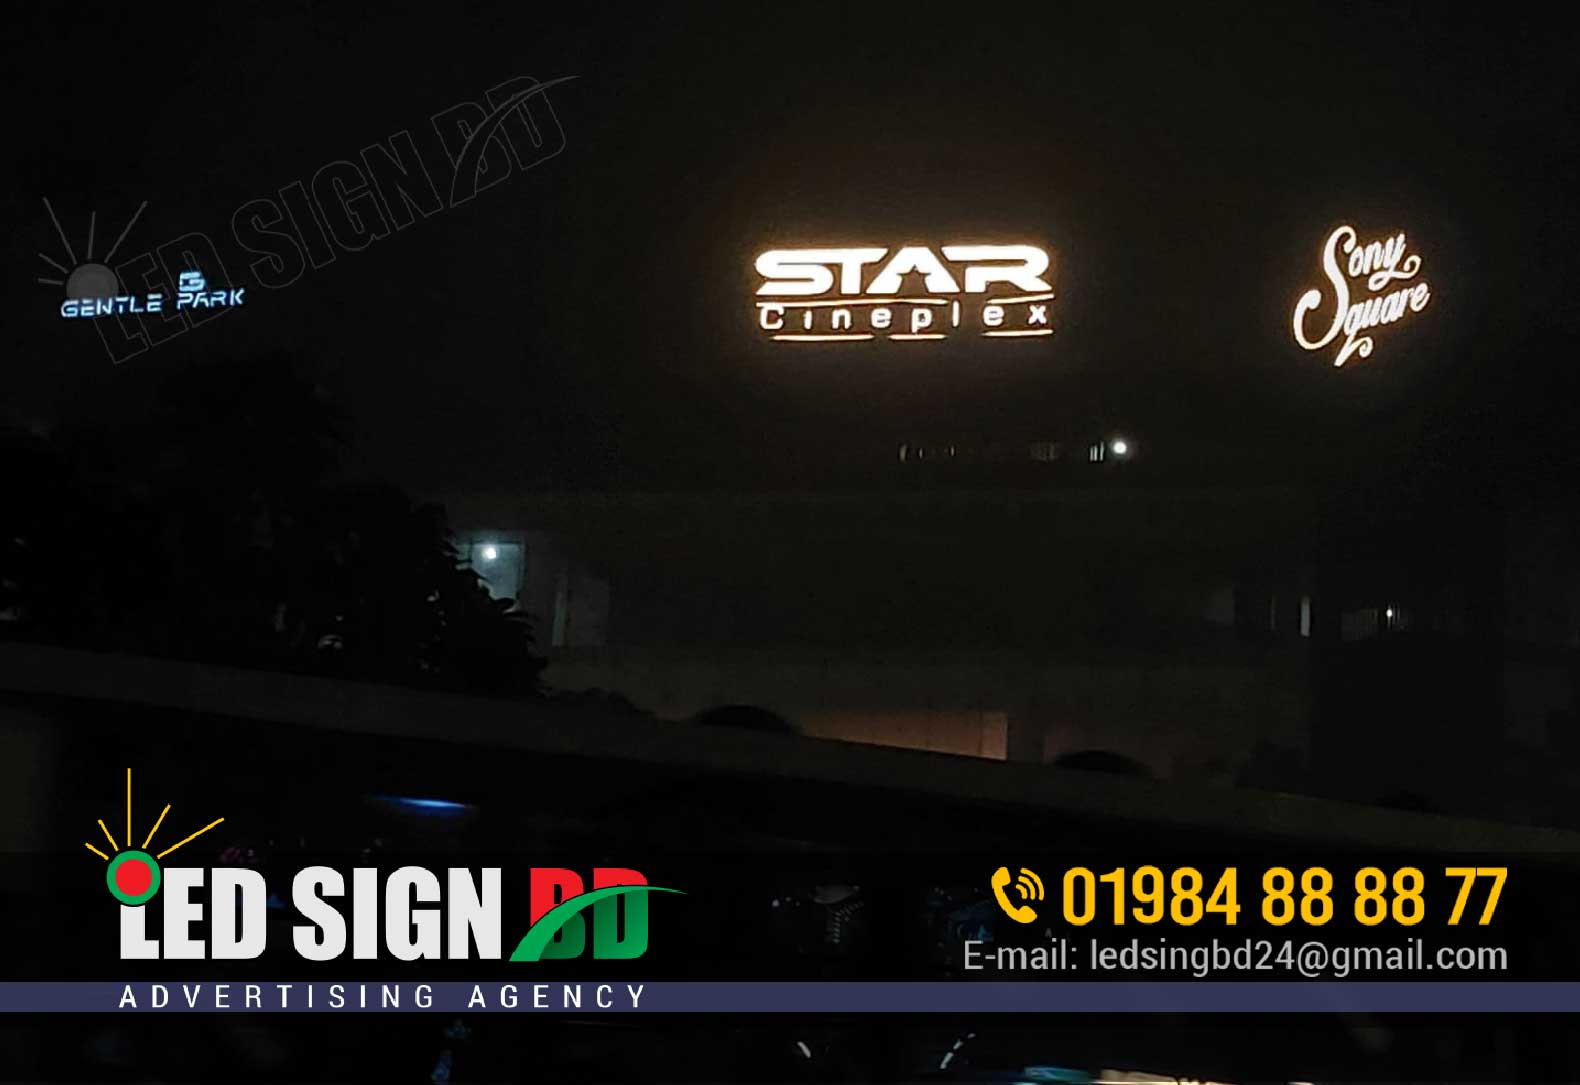 Acrylic 3D Letter Signs bd, Best signboard company in dhaka bangladesh, Mirpur signage company bd, Acrylic Letter with lighting signage bd